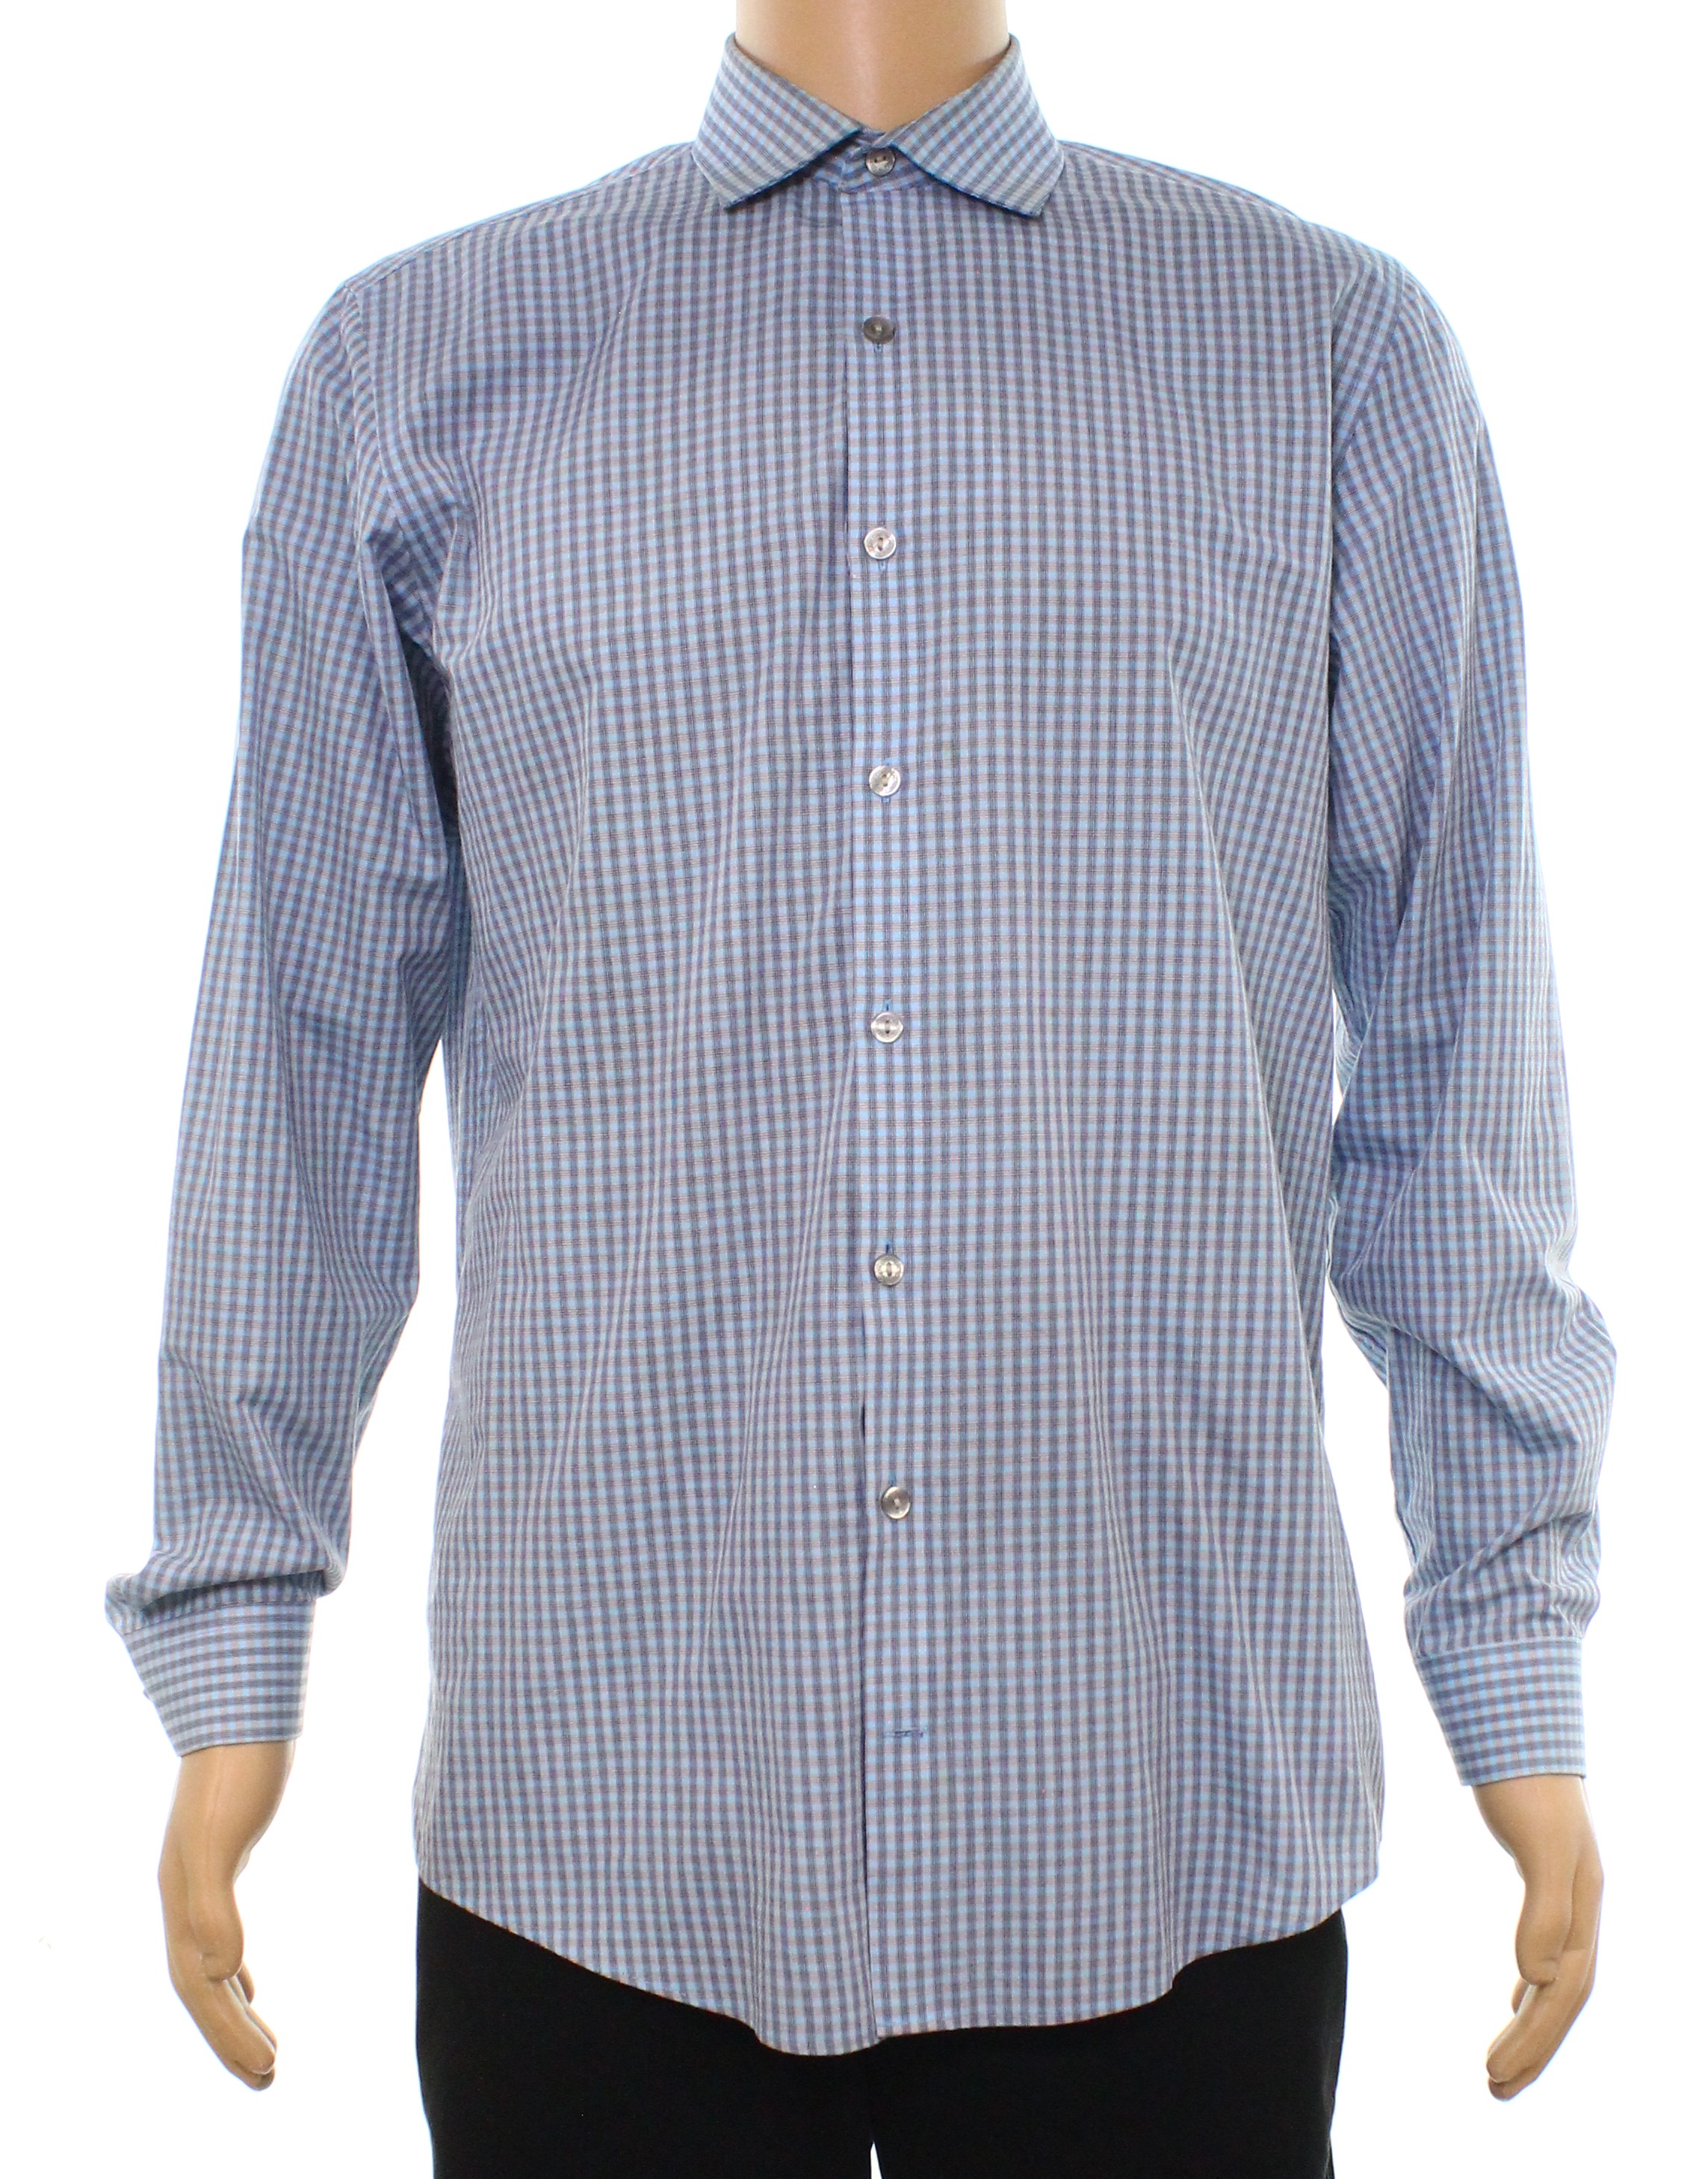 Kenneth Cole - Kenneth Cole NEW Blue Mens Size 16 Slim Fit Plaid ...